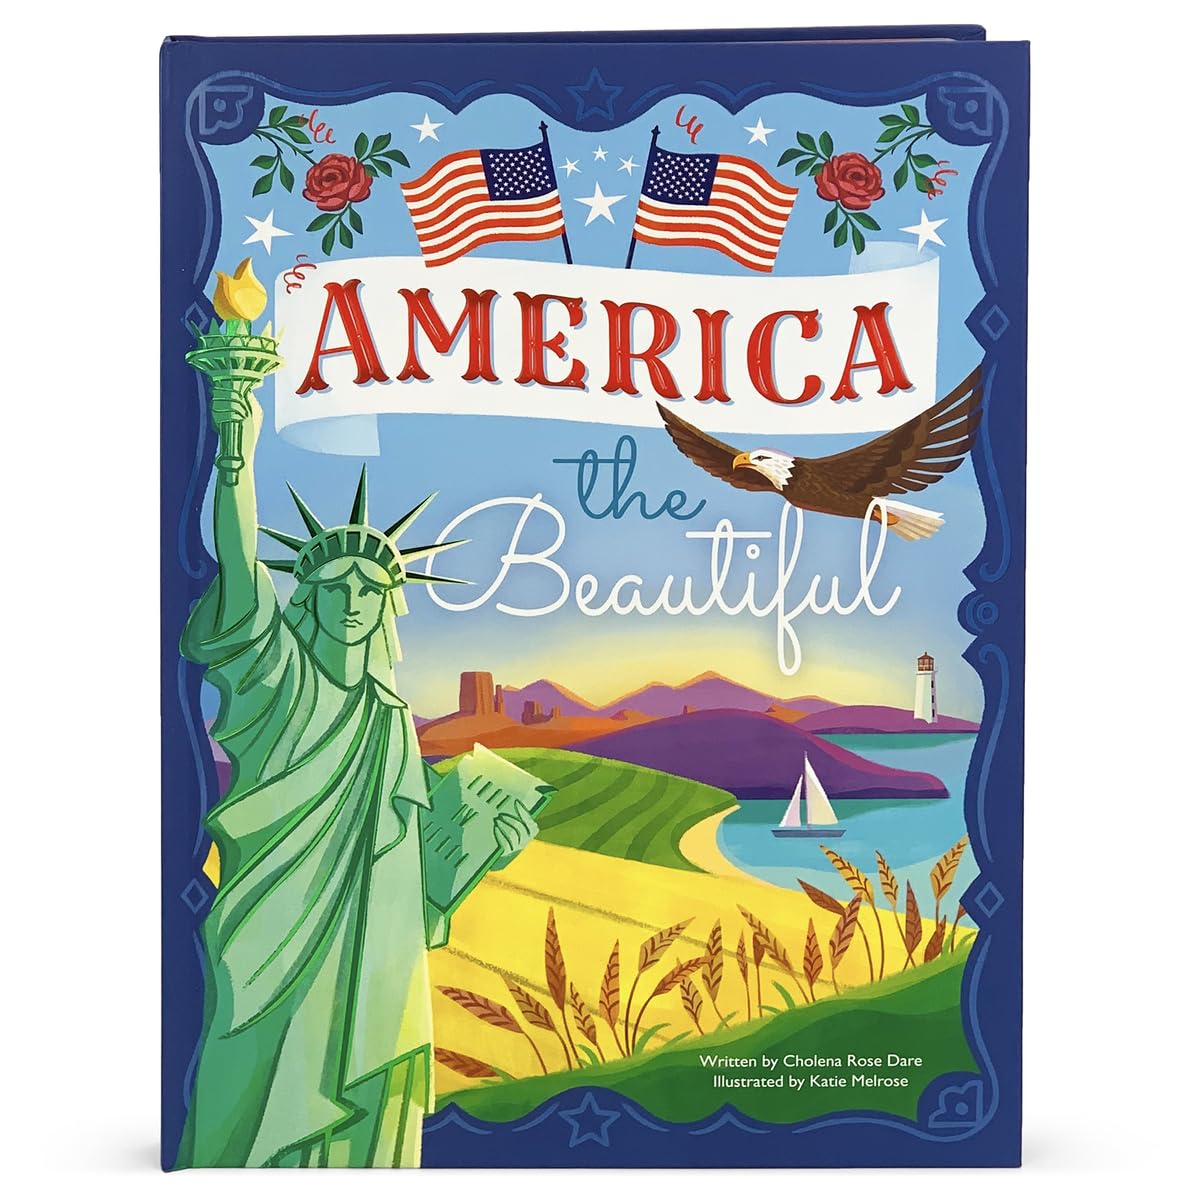 America the Beautiful by Melrose, Katie